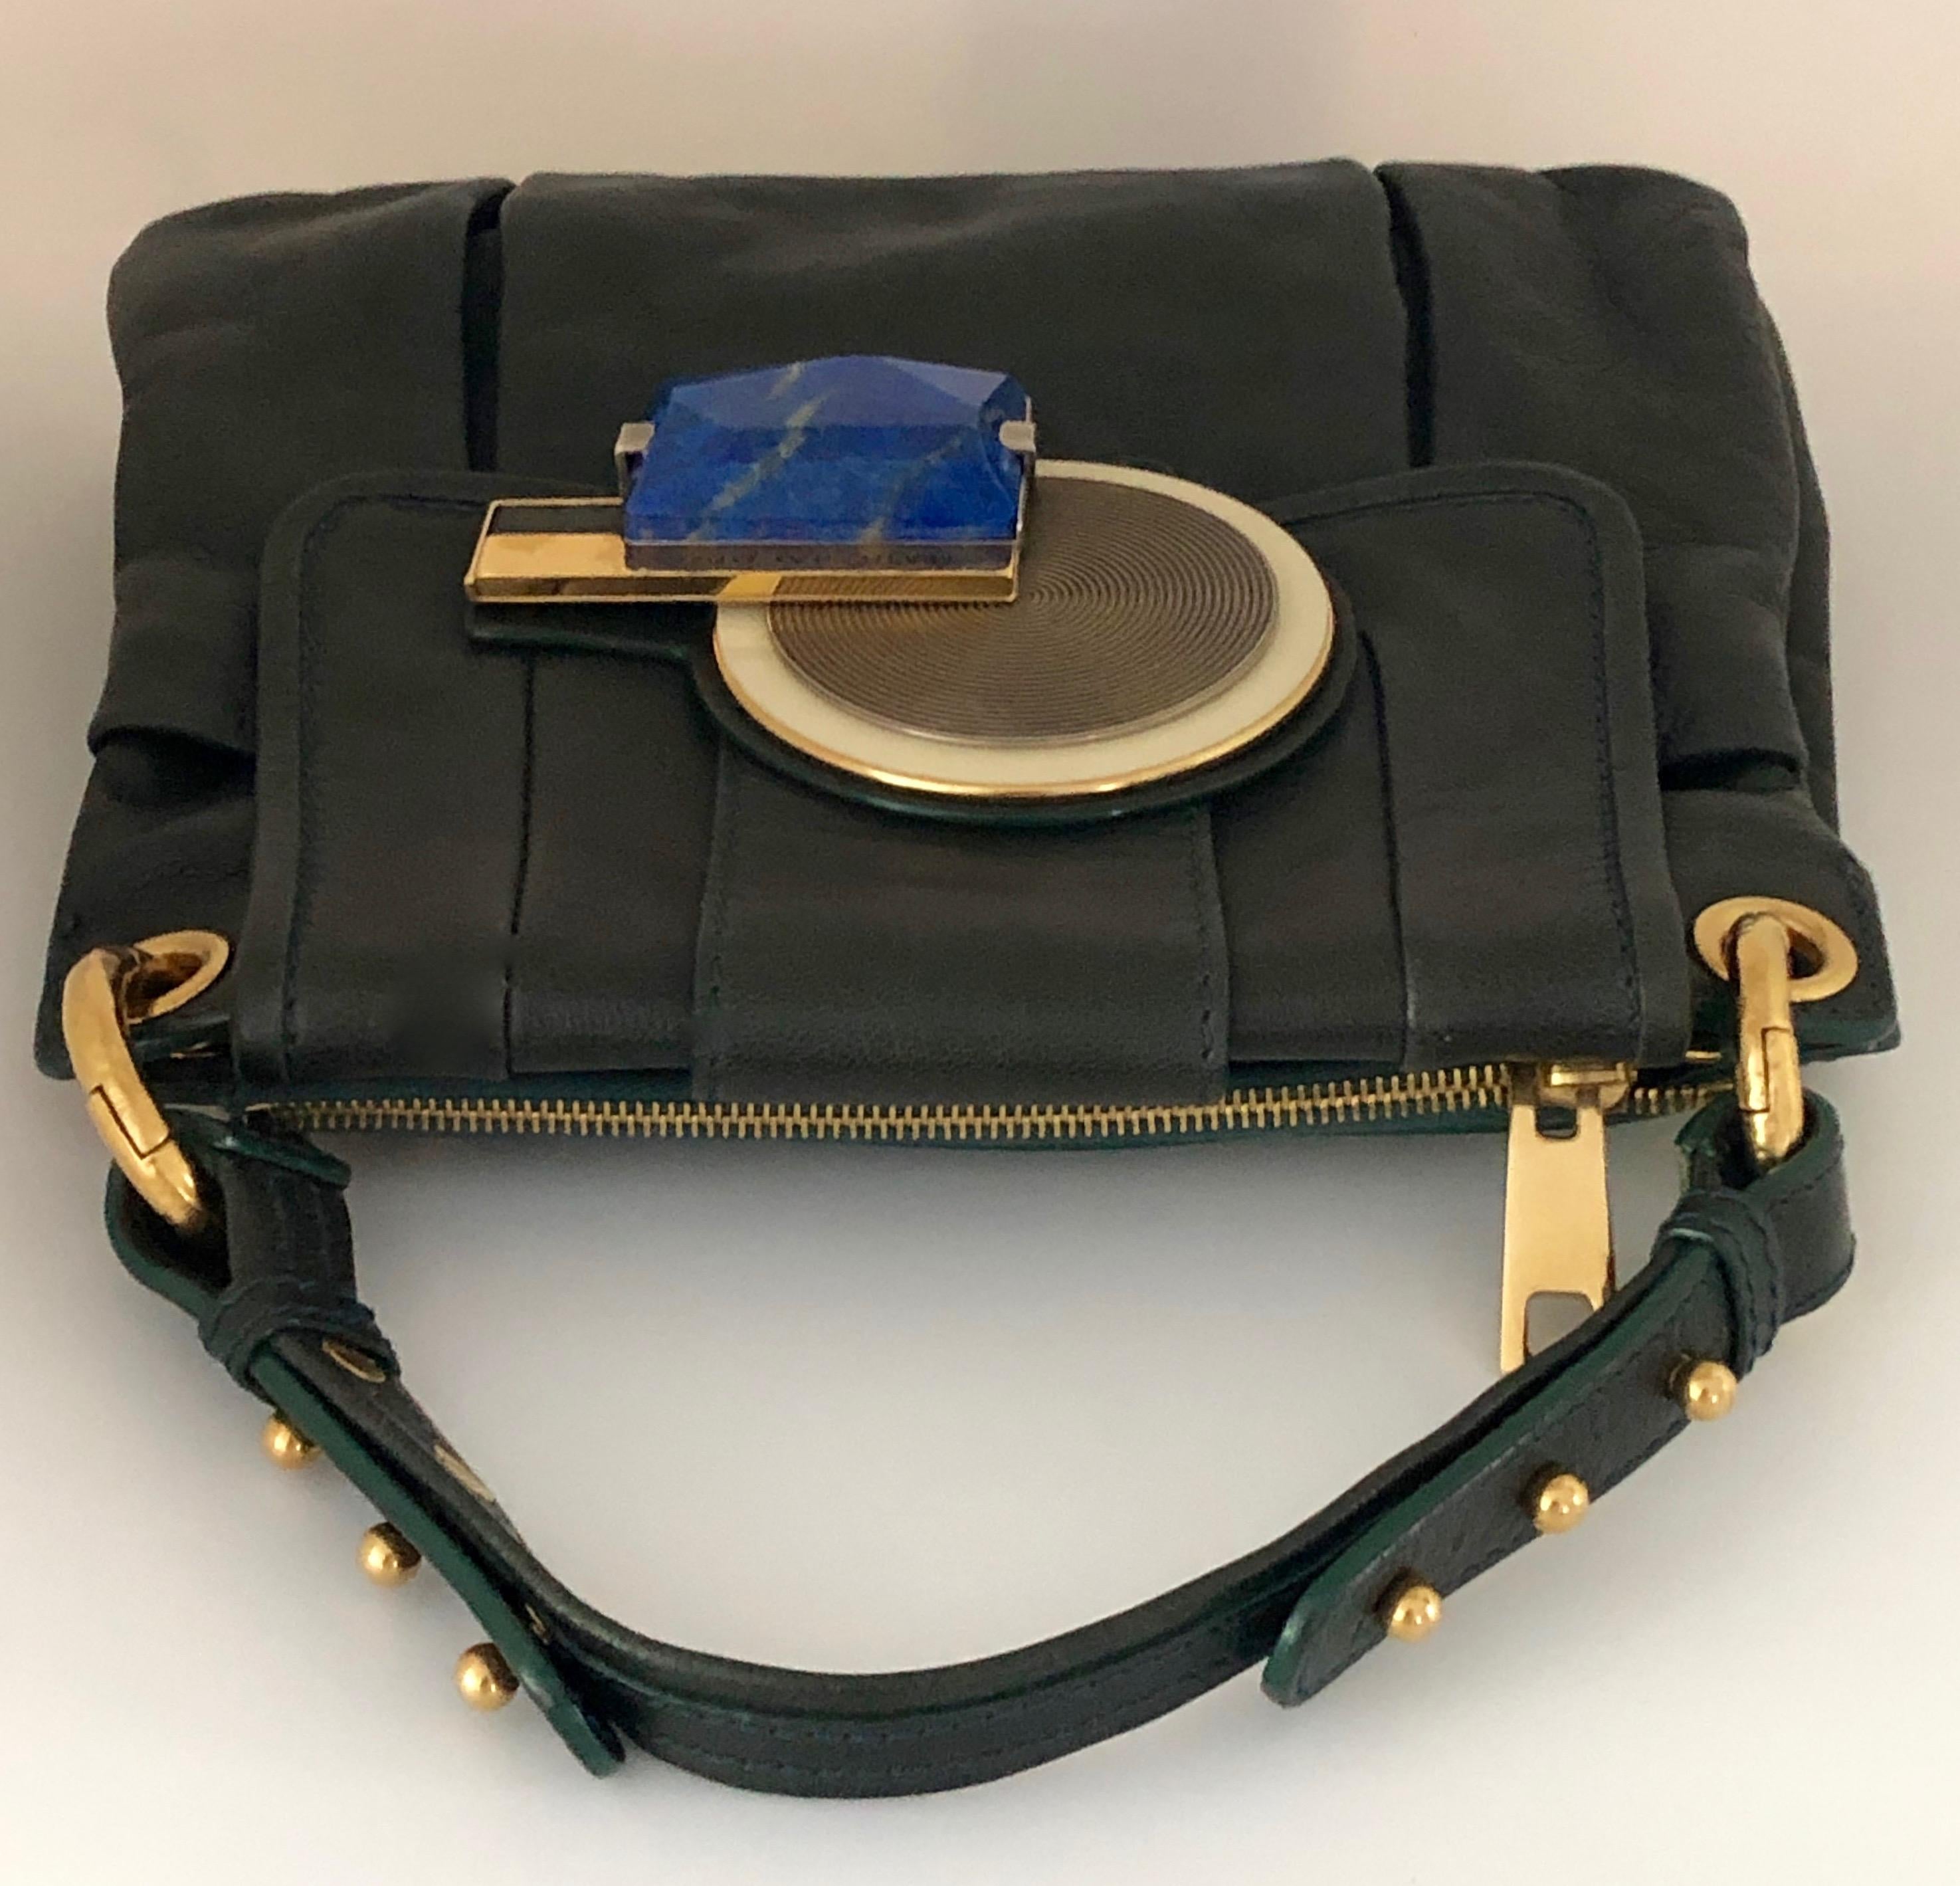 Marc Jacobs Green Leather Double Saddlebag w/ Top Handle & Metal / Jewel Accents 2